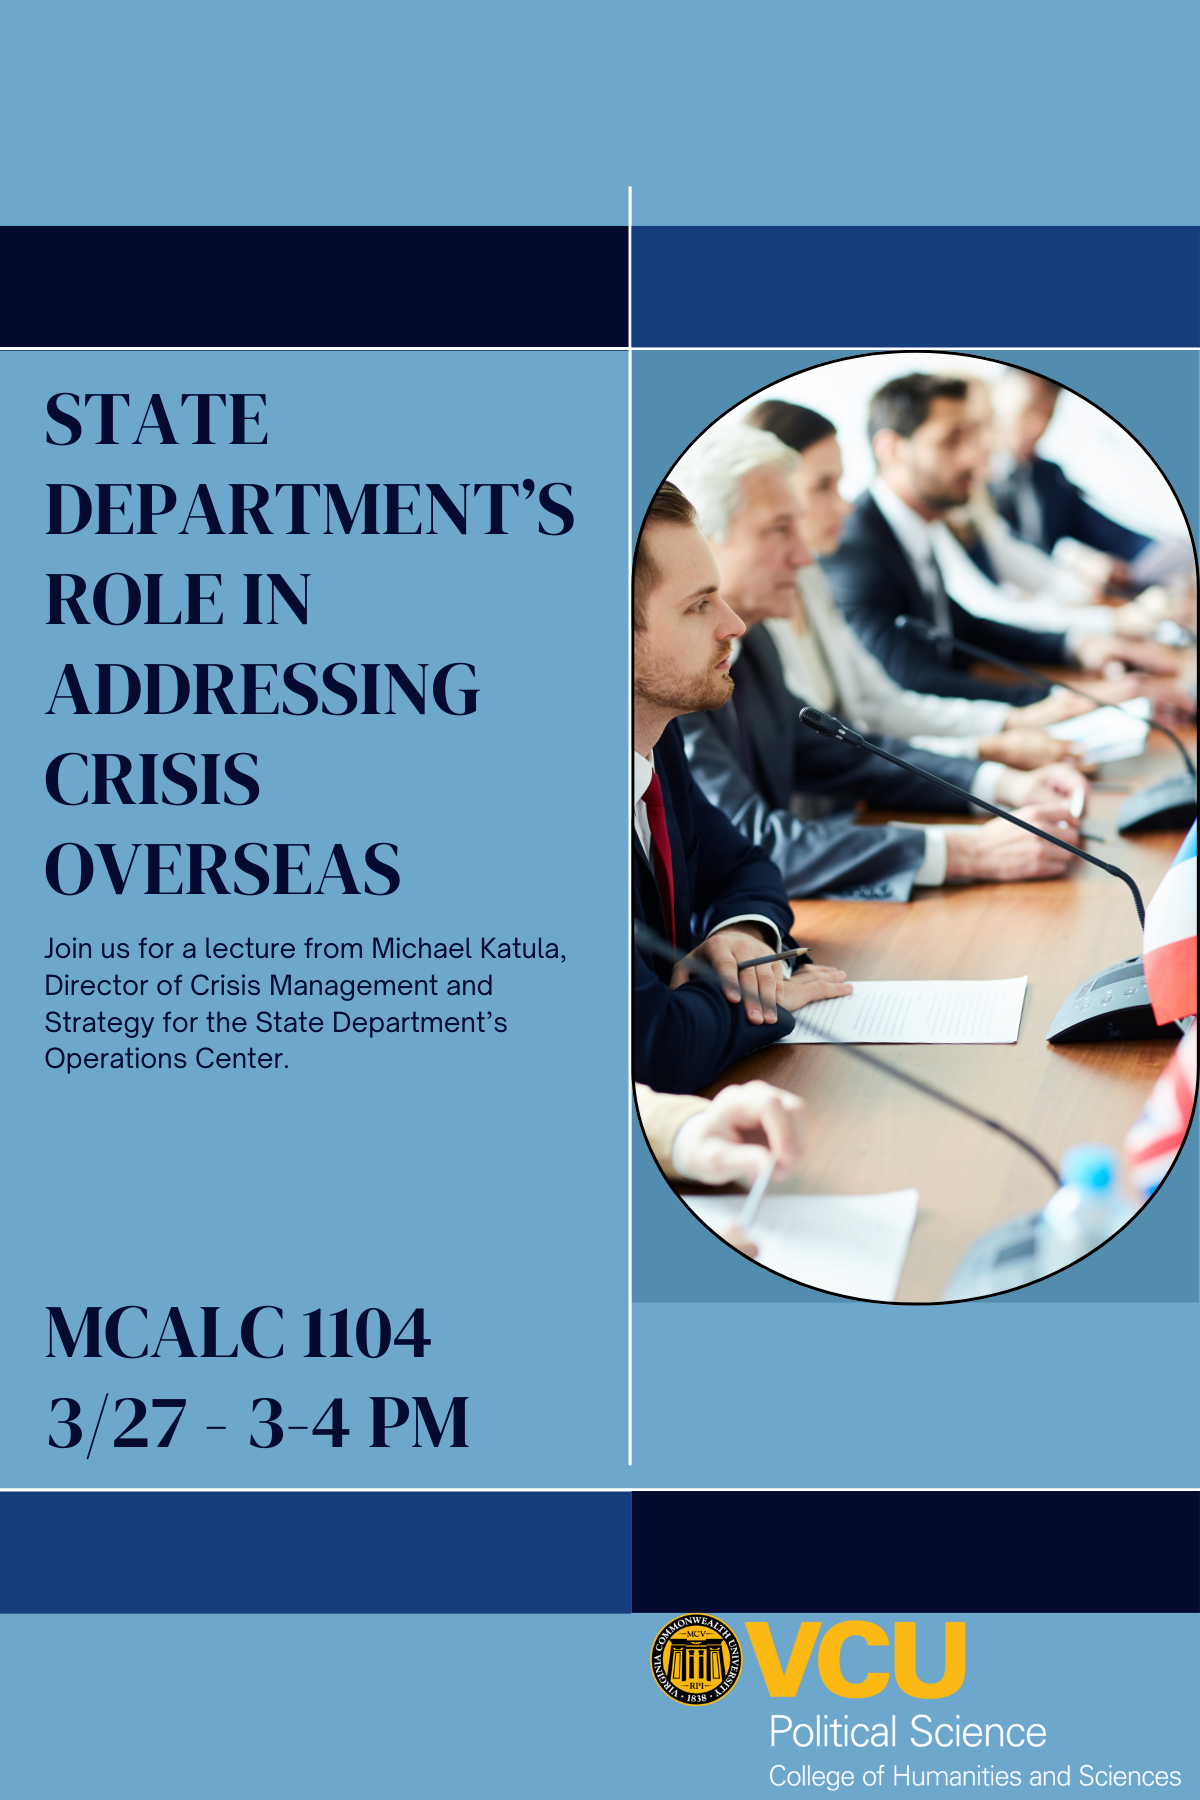 State Department's Role in Addressing Crisis Overseas, MCALC 1104, 3/27 @ 3 PM